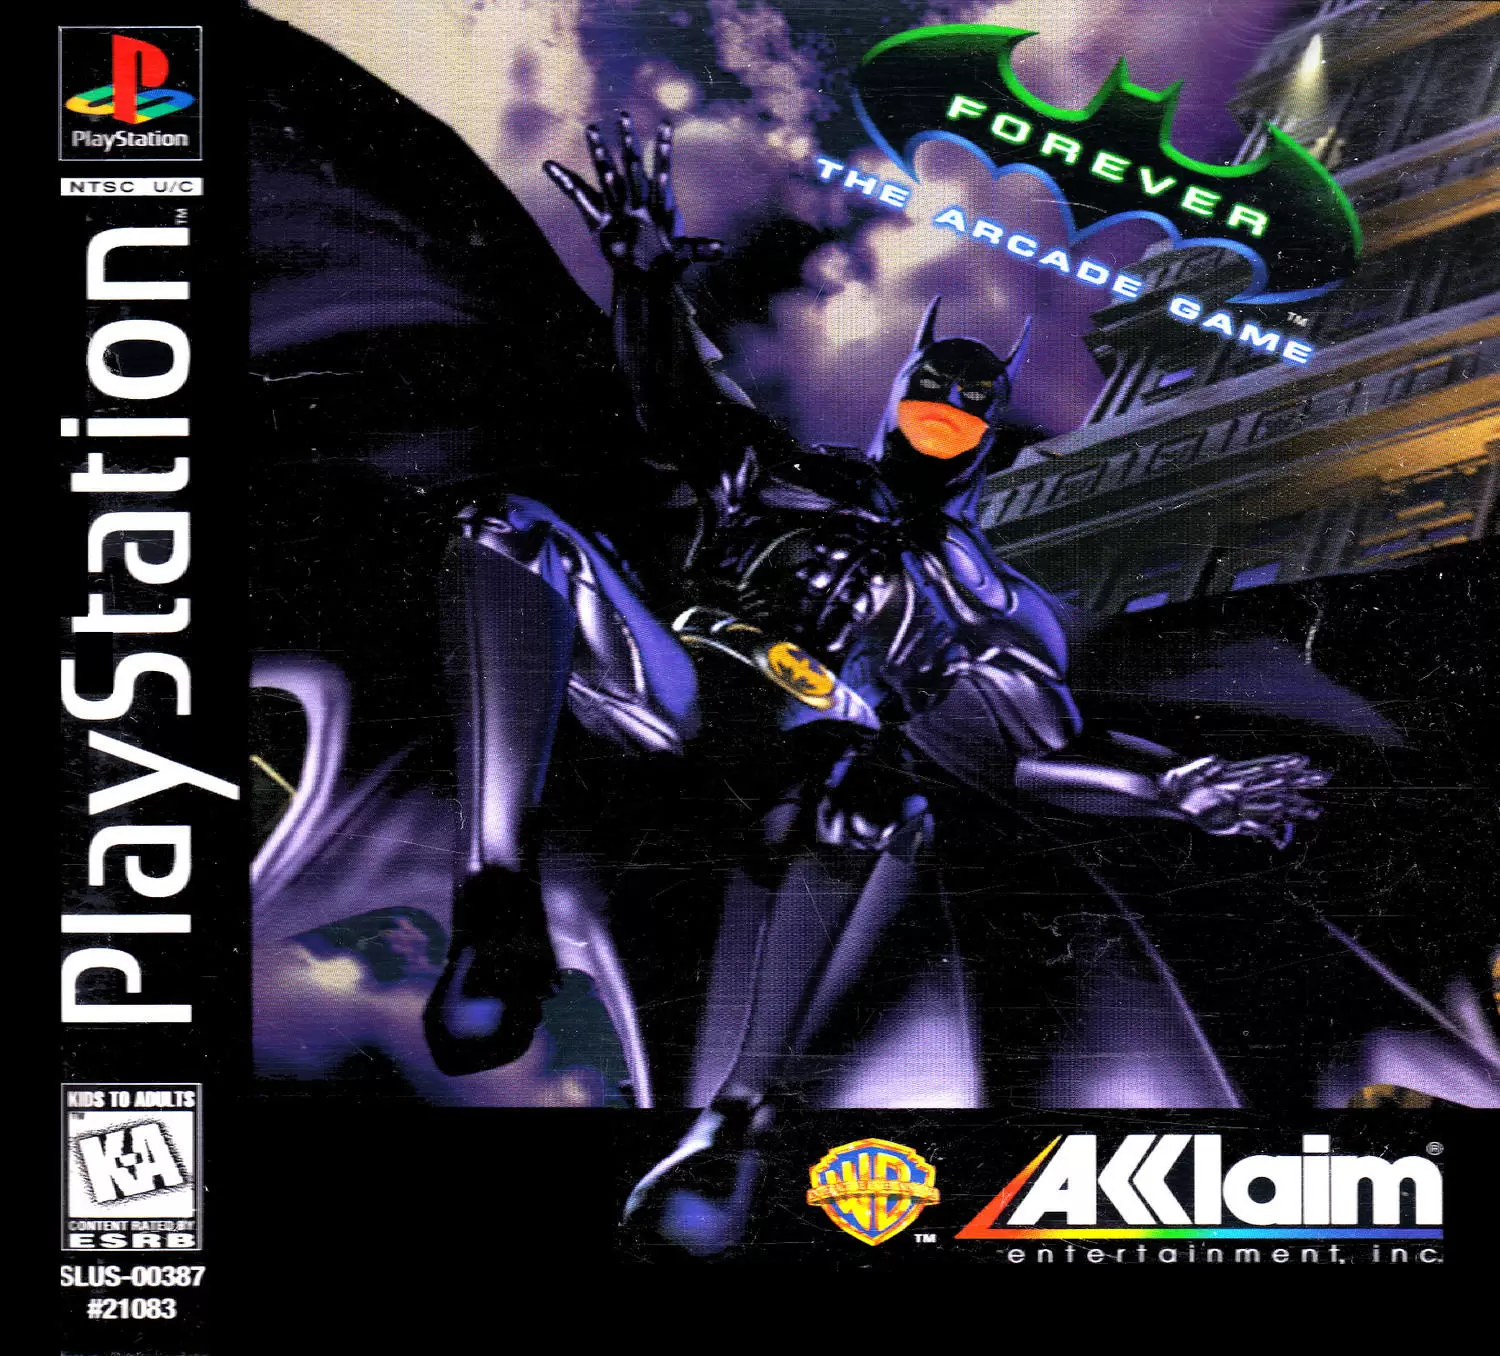 Playstation games - Batman Forever: The Arcade Game